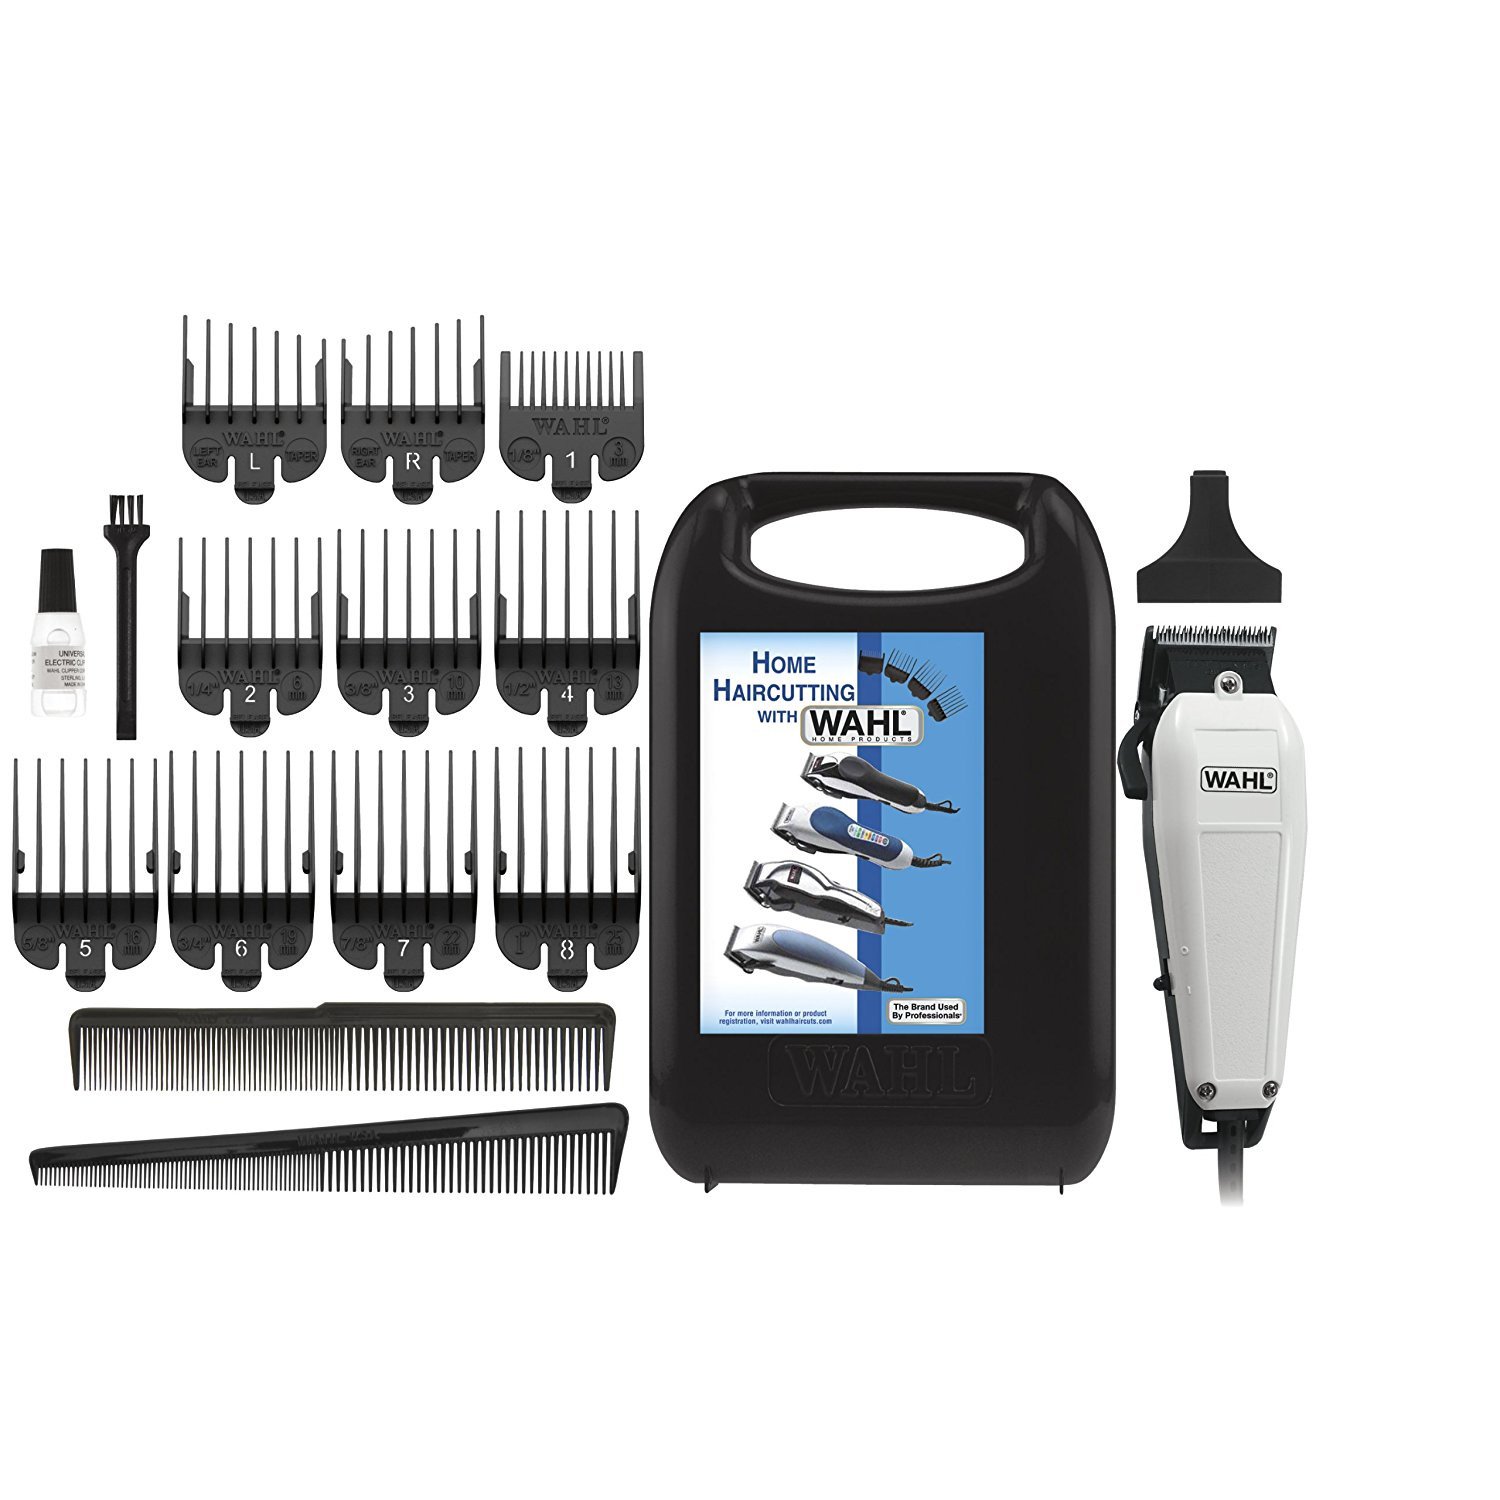 WAHL 9236-00 The Styler 7 Piece Complete Haircutting Kit, White, 1 Count